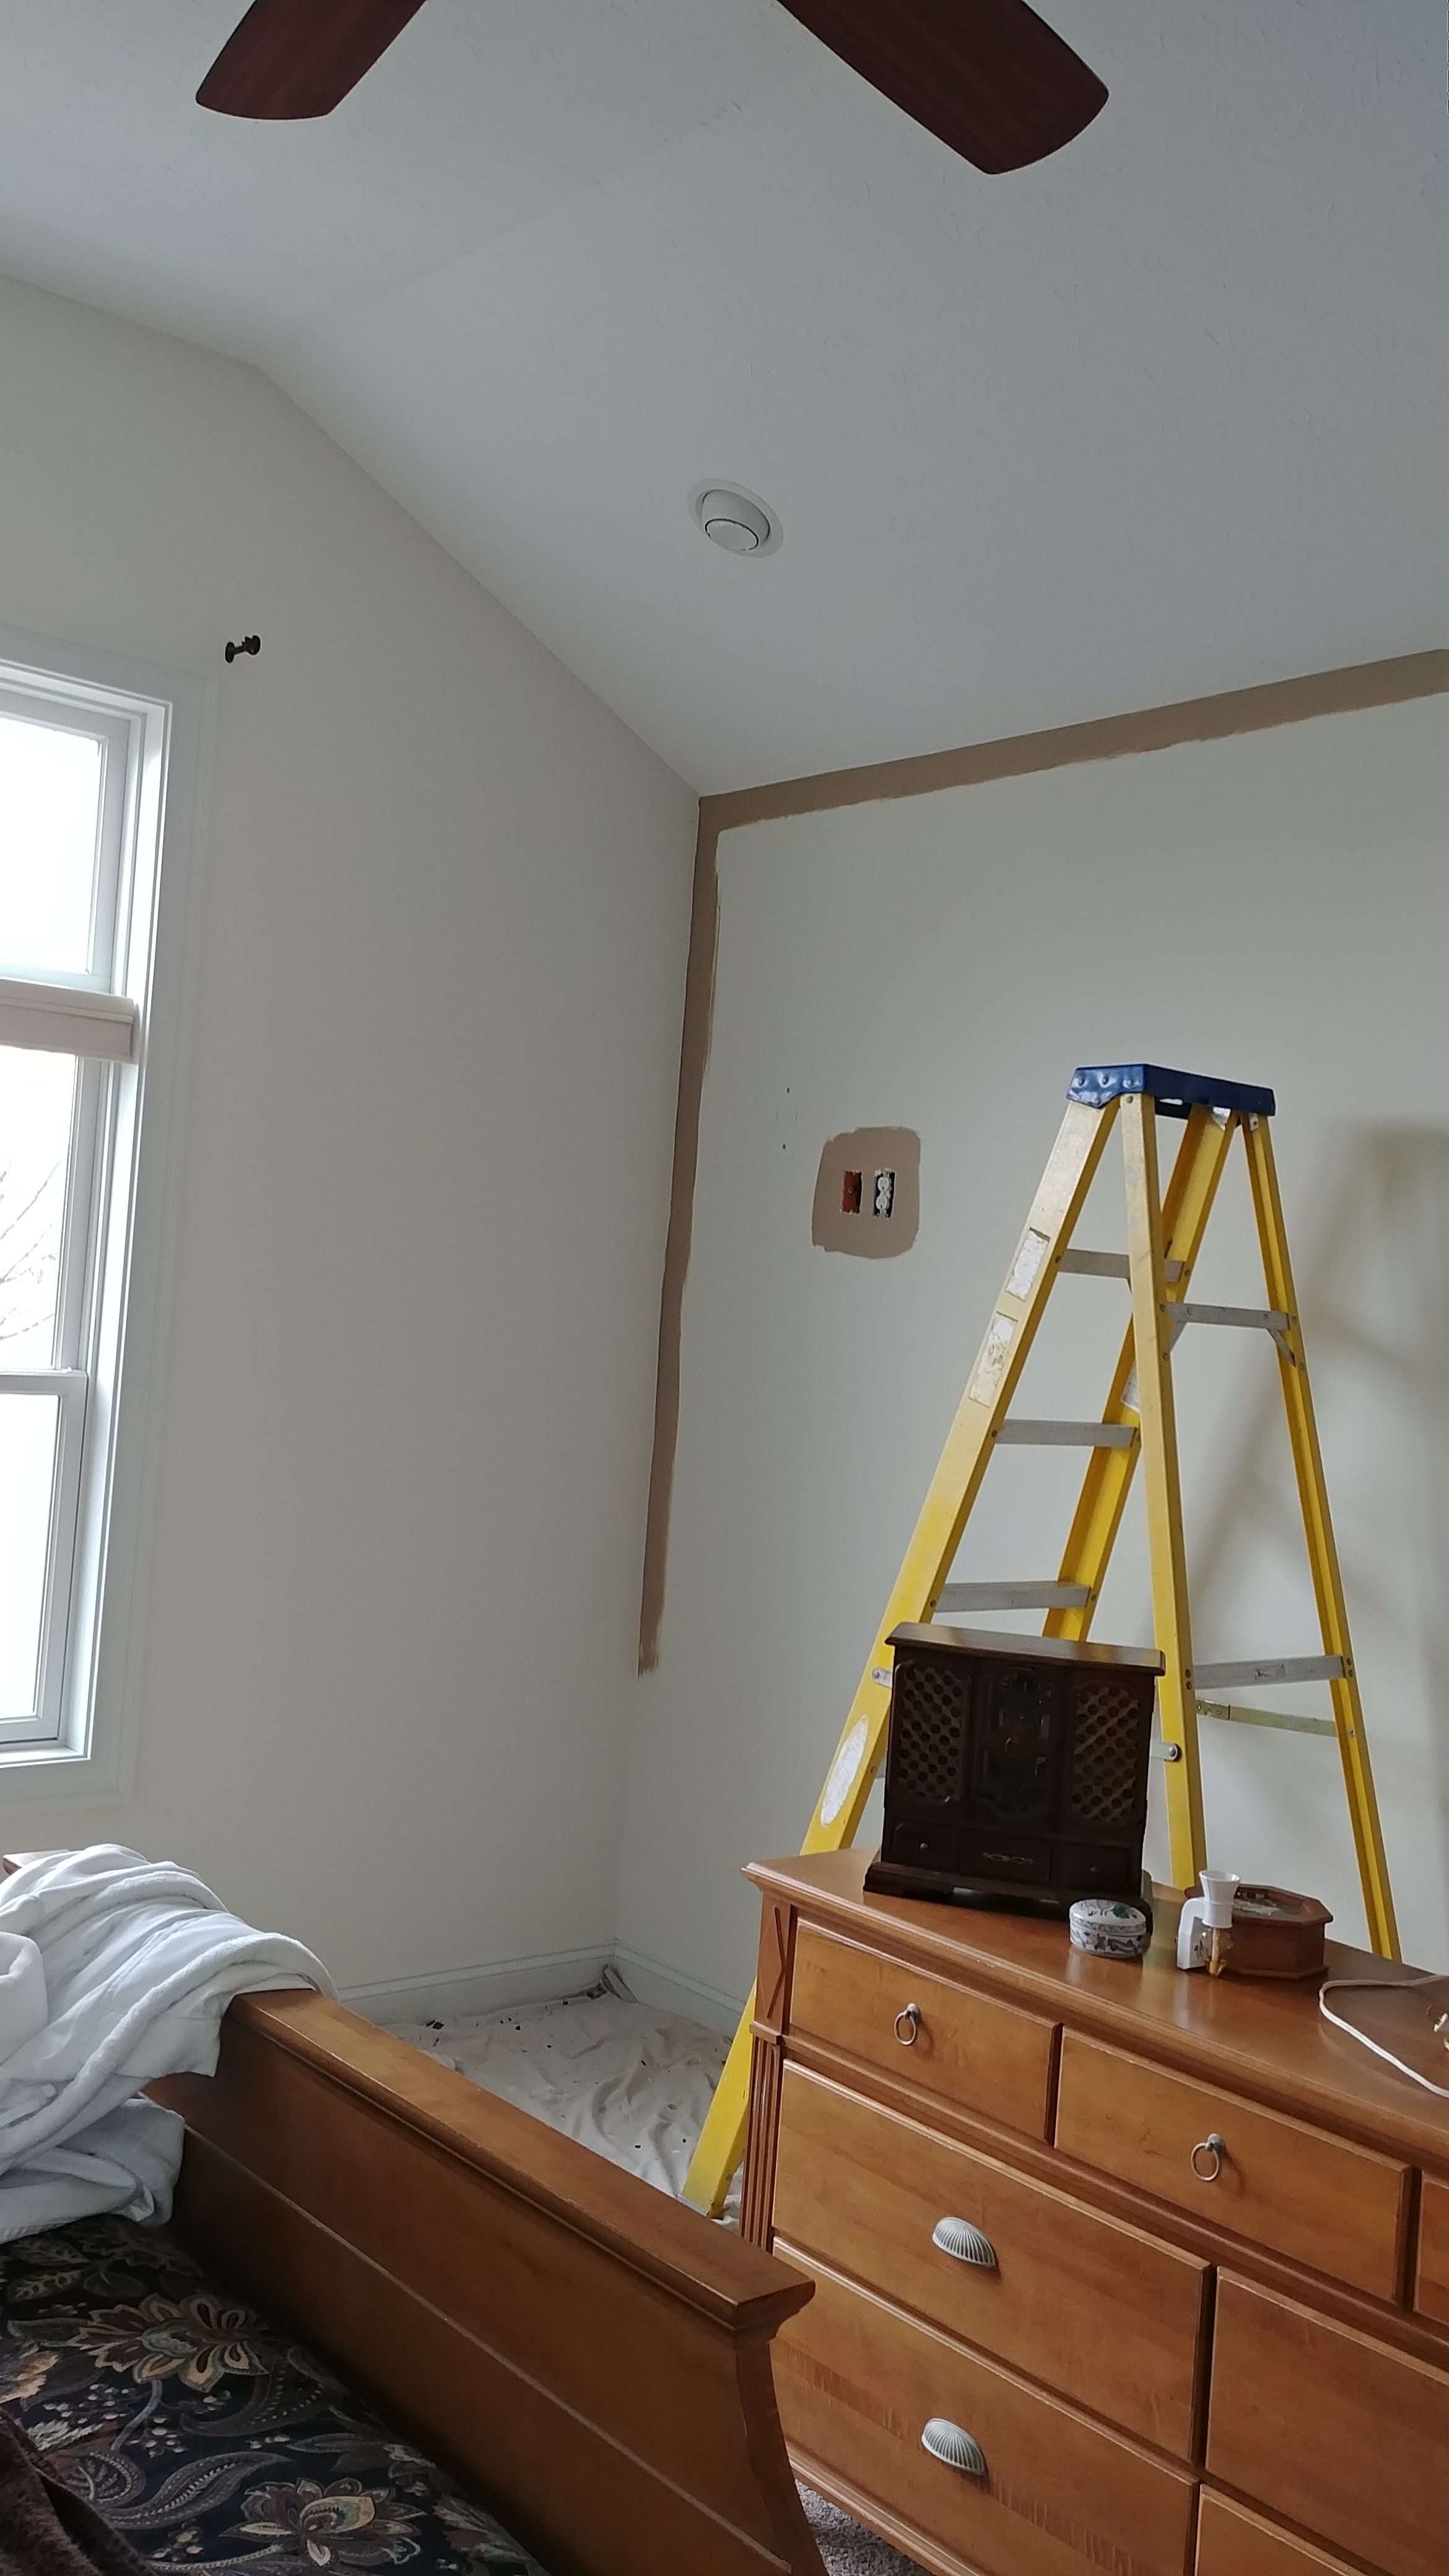 During - Interior Painting of a Bedroom in Eaton Township